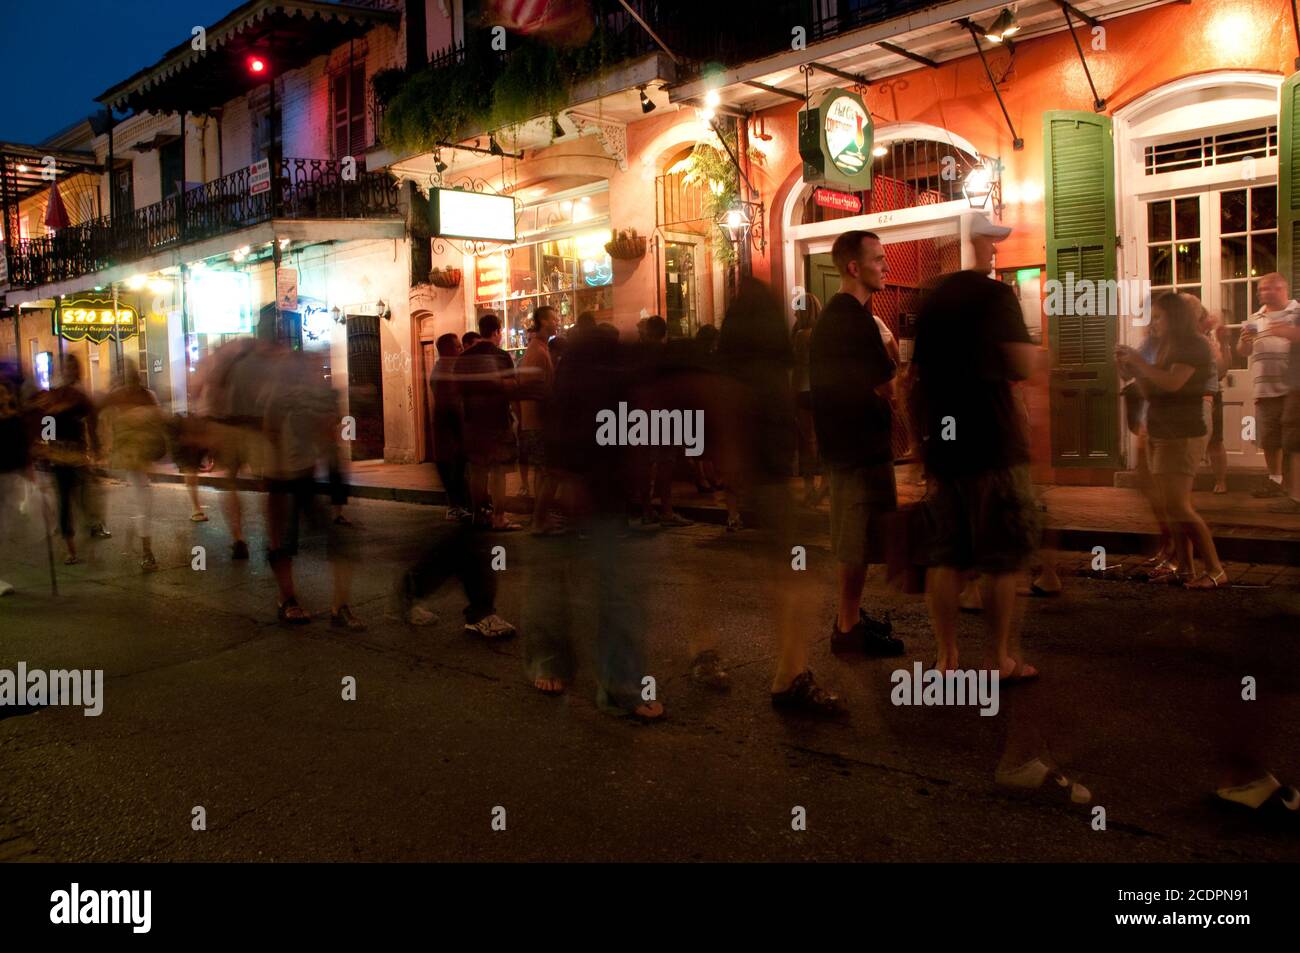 The streets of the French Quarter of New Orleans busy with tourists and locals partying in the evening, Louisiana, United States. Stock Photo